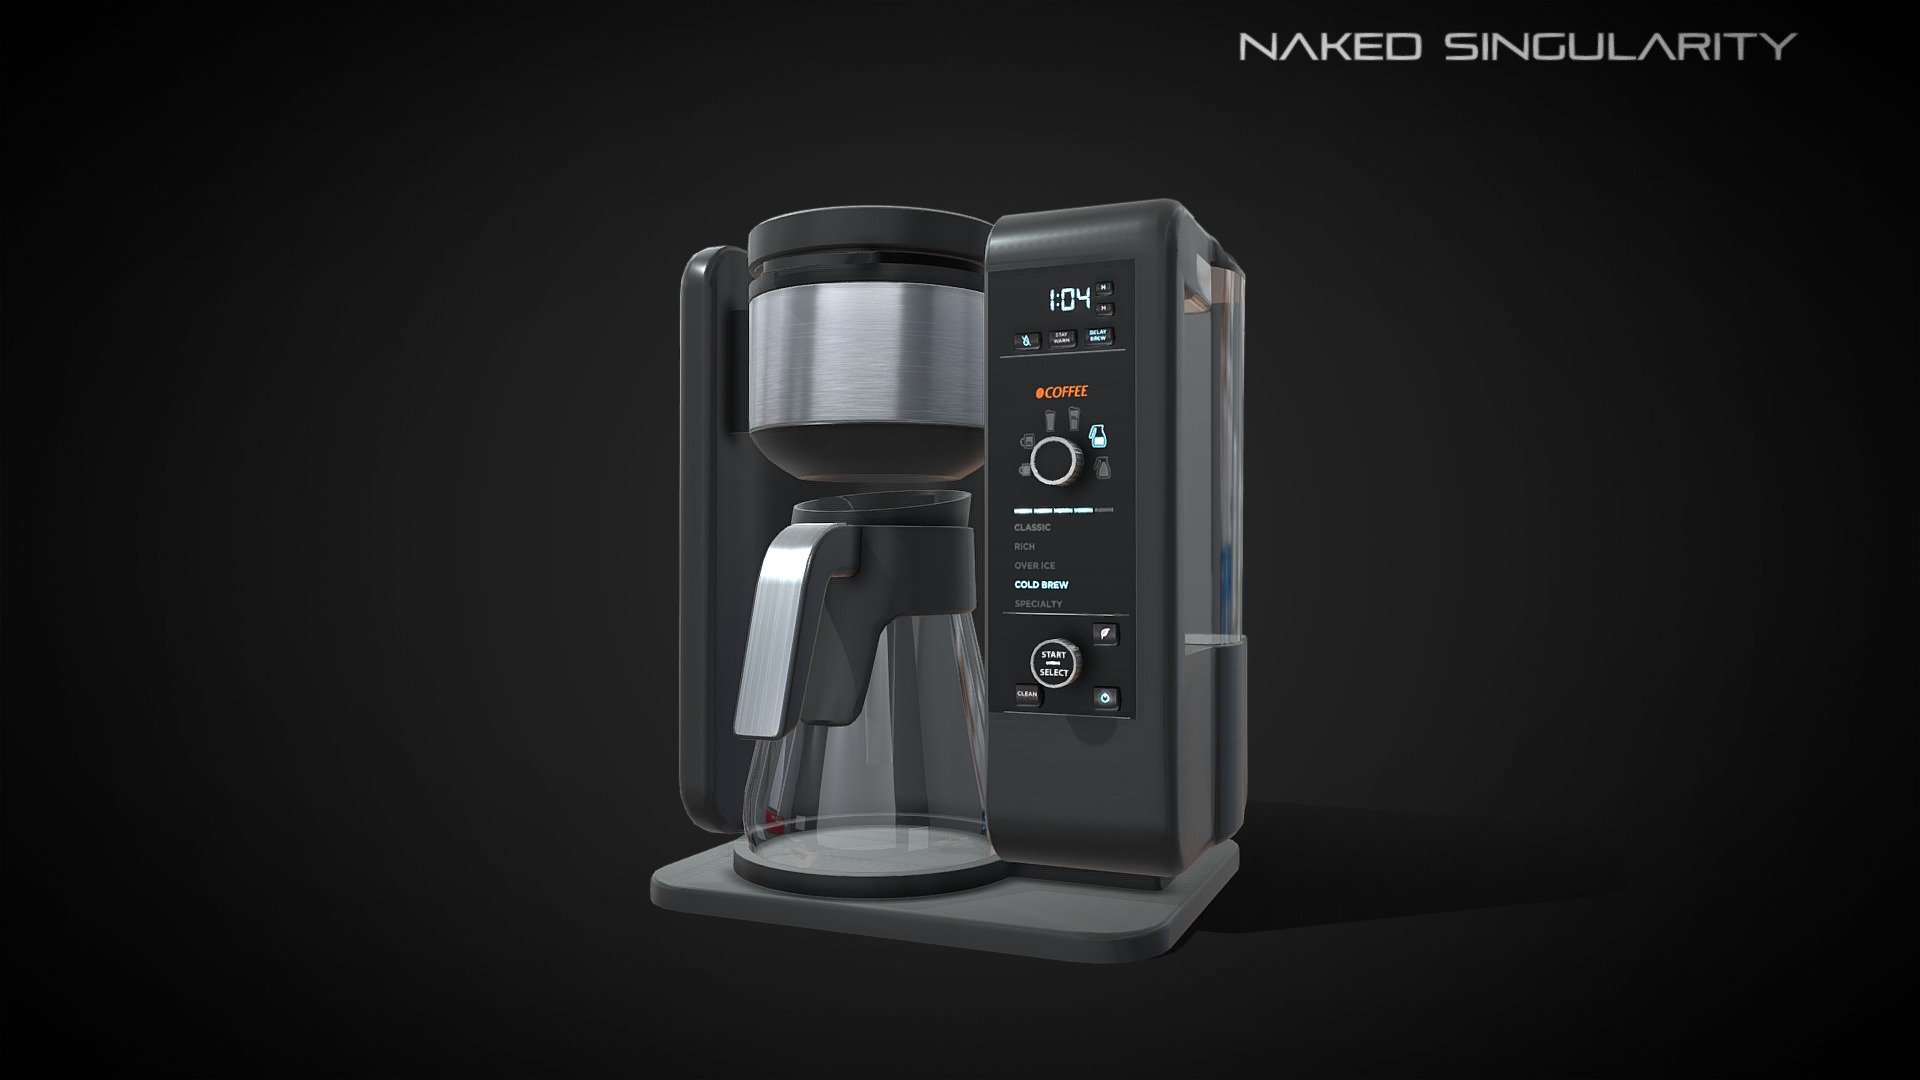 Coffee Brewer - Appliance / Electronic Lowpoly




High quality lowpoly model.

Parts are seperated so you can create animation in your 3d software.

4K texture.

UV channel 2 unwrapped (for lightmap in Unity, Unreal Engine)

Check out other appliance electronic models here

Check out other fruit models here

Check out other vegetable models here

Check out other bakery models here

Customer support: nakedsingularity.studio@gmail.com

Youtube

Facebook - Coffee Brewer - Appliance / Electronic Lowpoly - Buy Royalty Free 3D model by Naked Singularity Studio (@nakedsingularity) 3d model